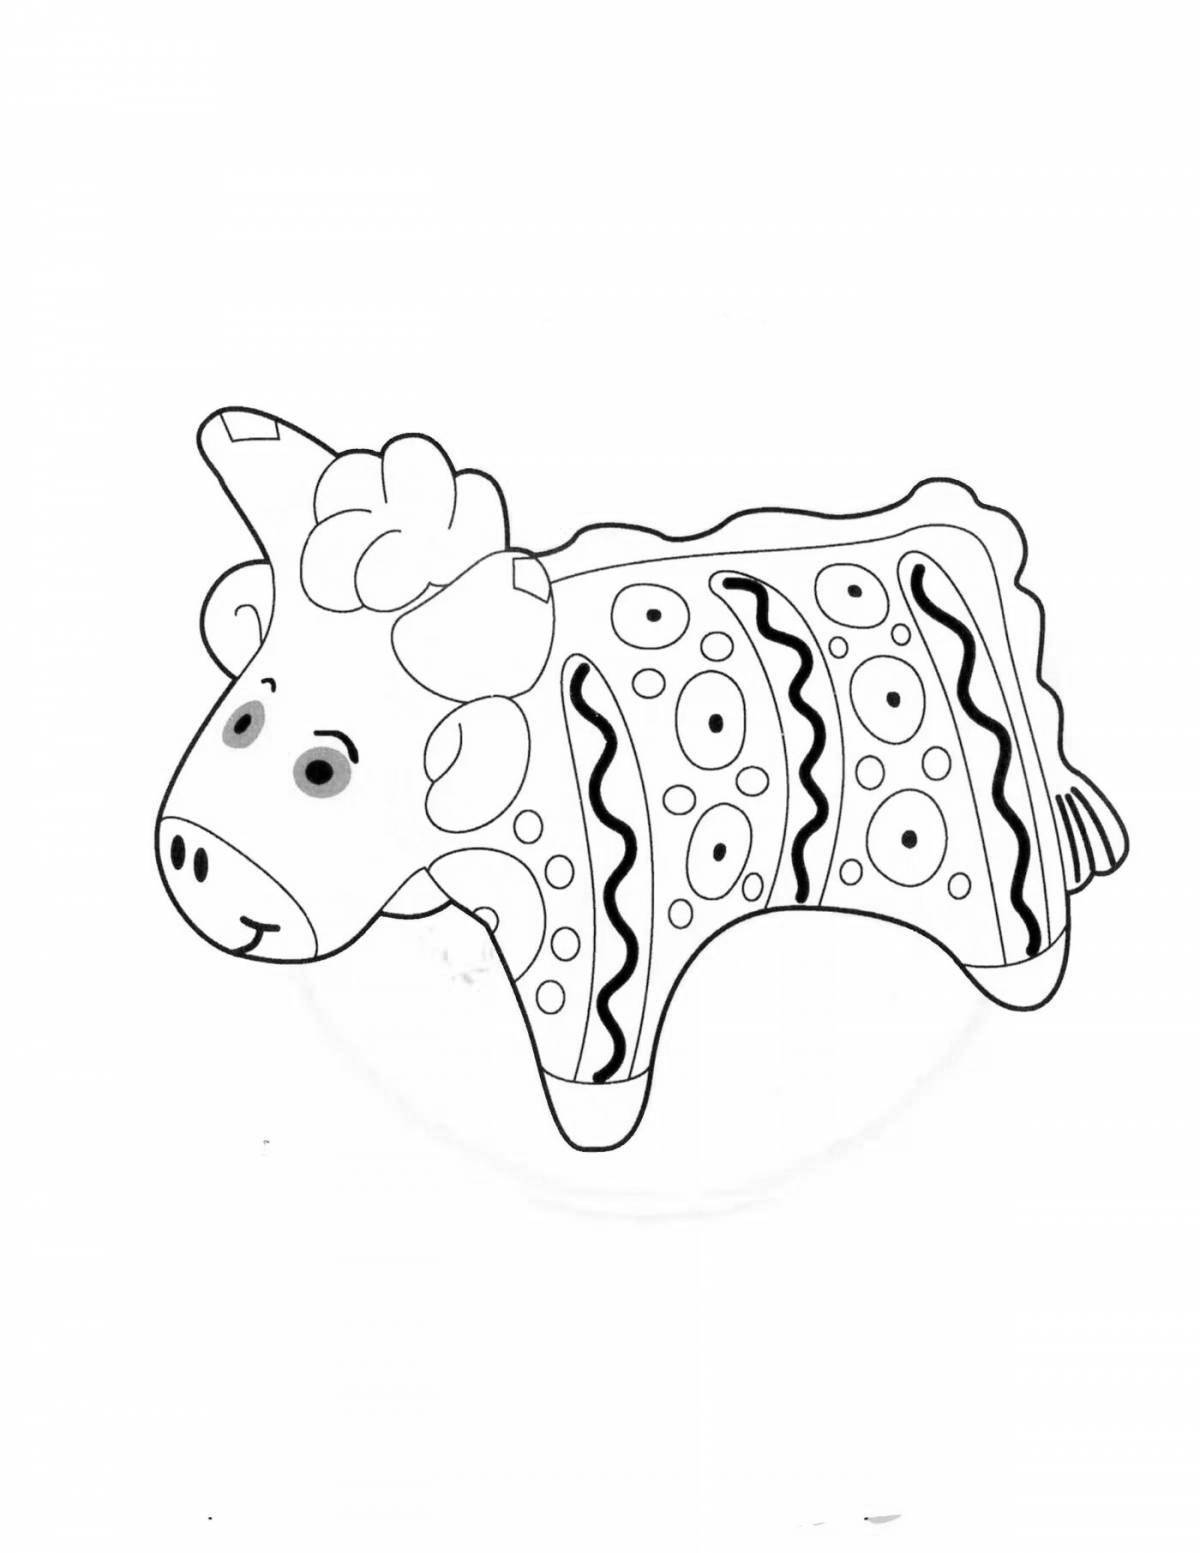 Joy Whistle coloring page for juniors